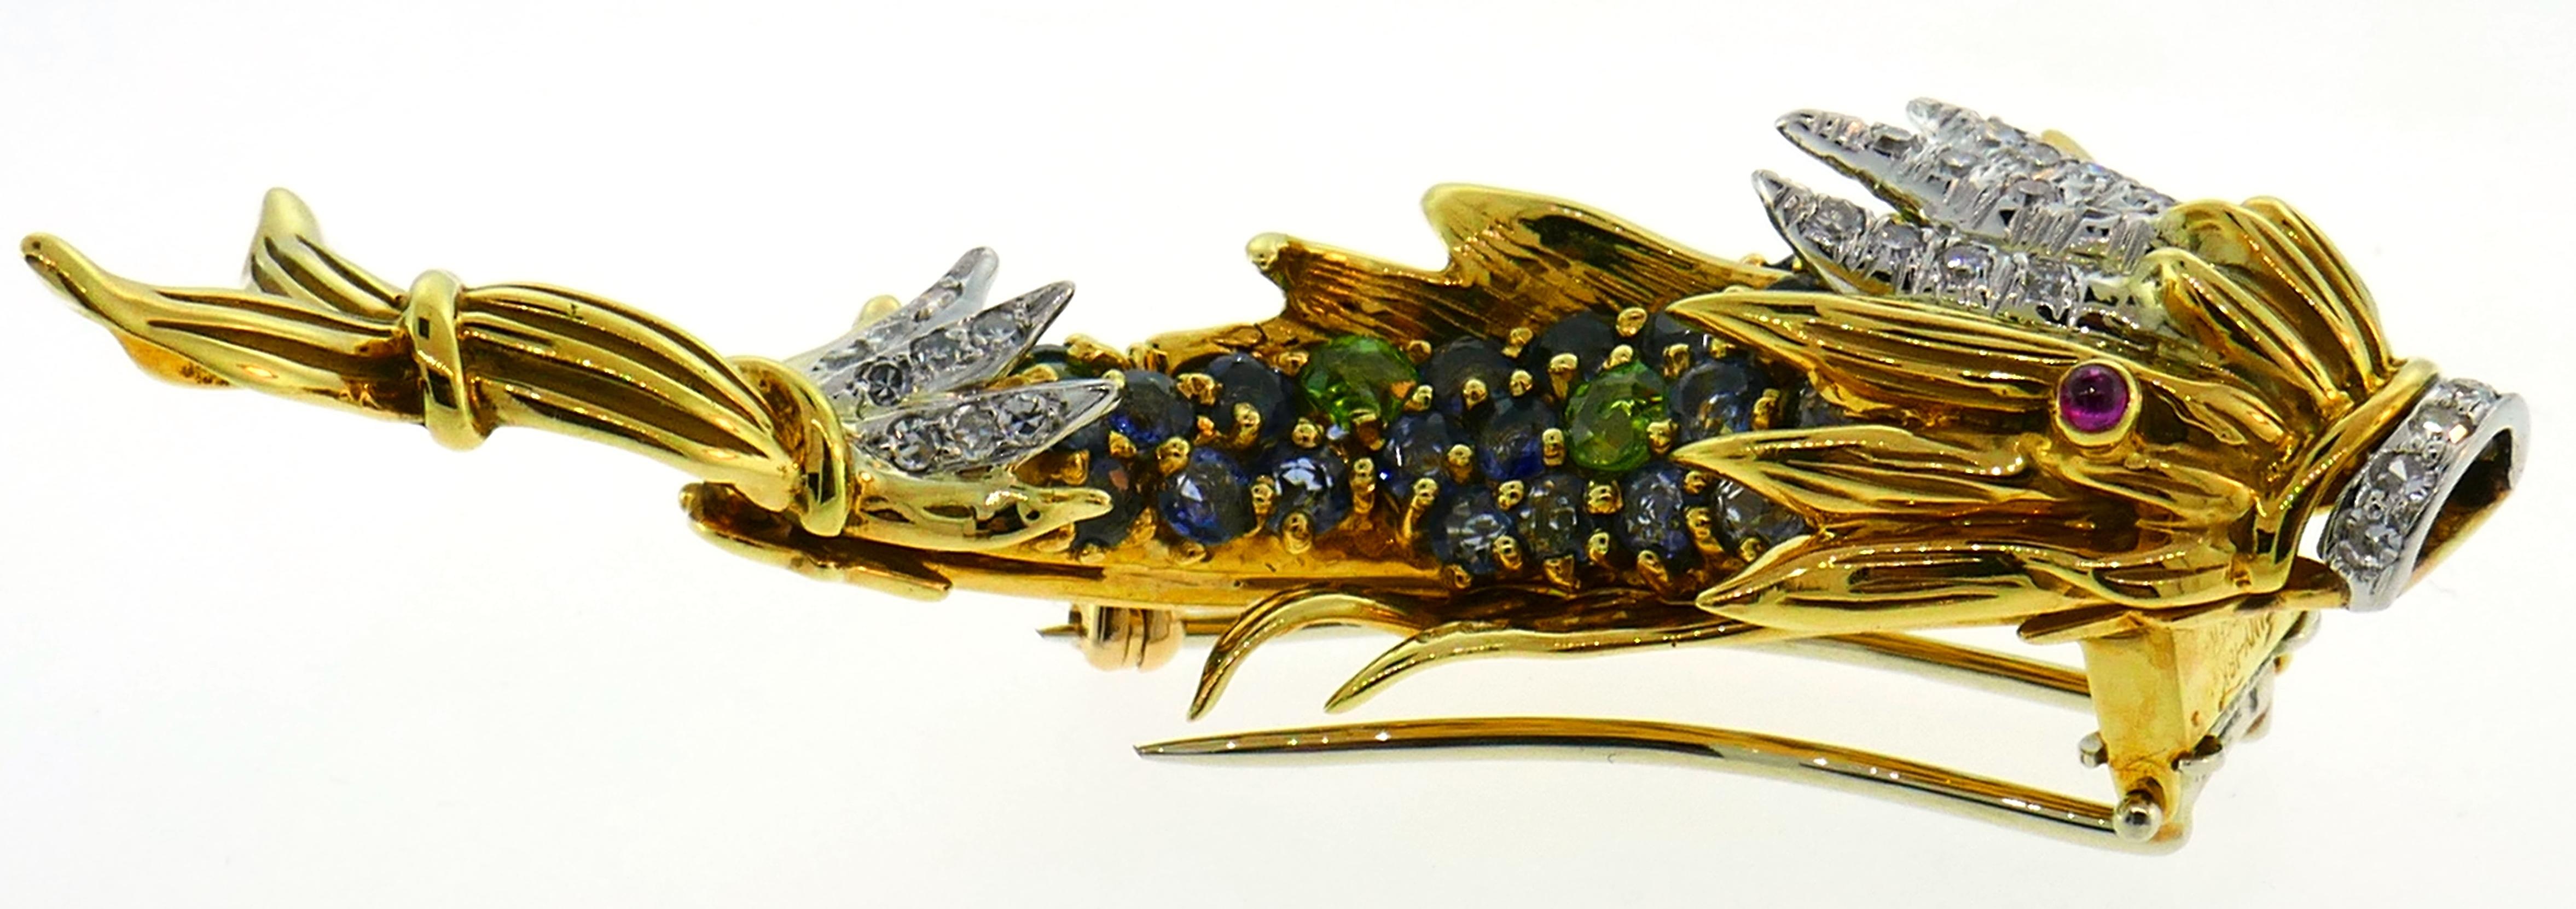 Lovely joyful clip created by Jean Schlumberger for Tiffany & Co. in the 1950s. Designed as a mystical fish, the brooch is definitely a conversational piece. Whimsical, colorful and wearable, the clip is a great addition to your jewelry collection.